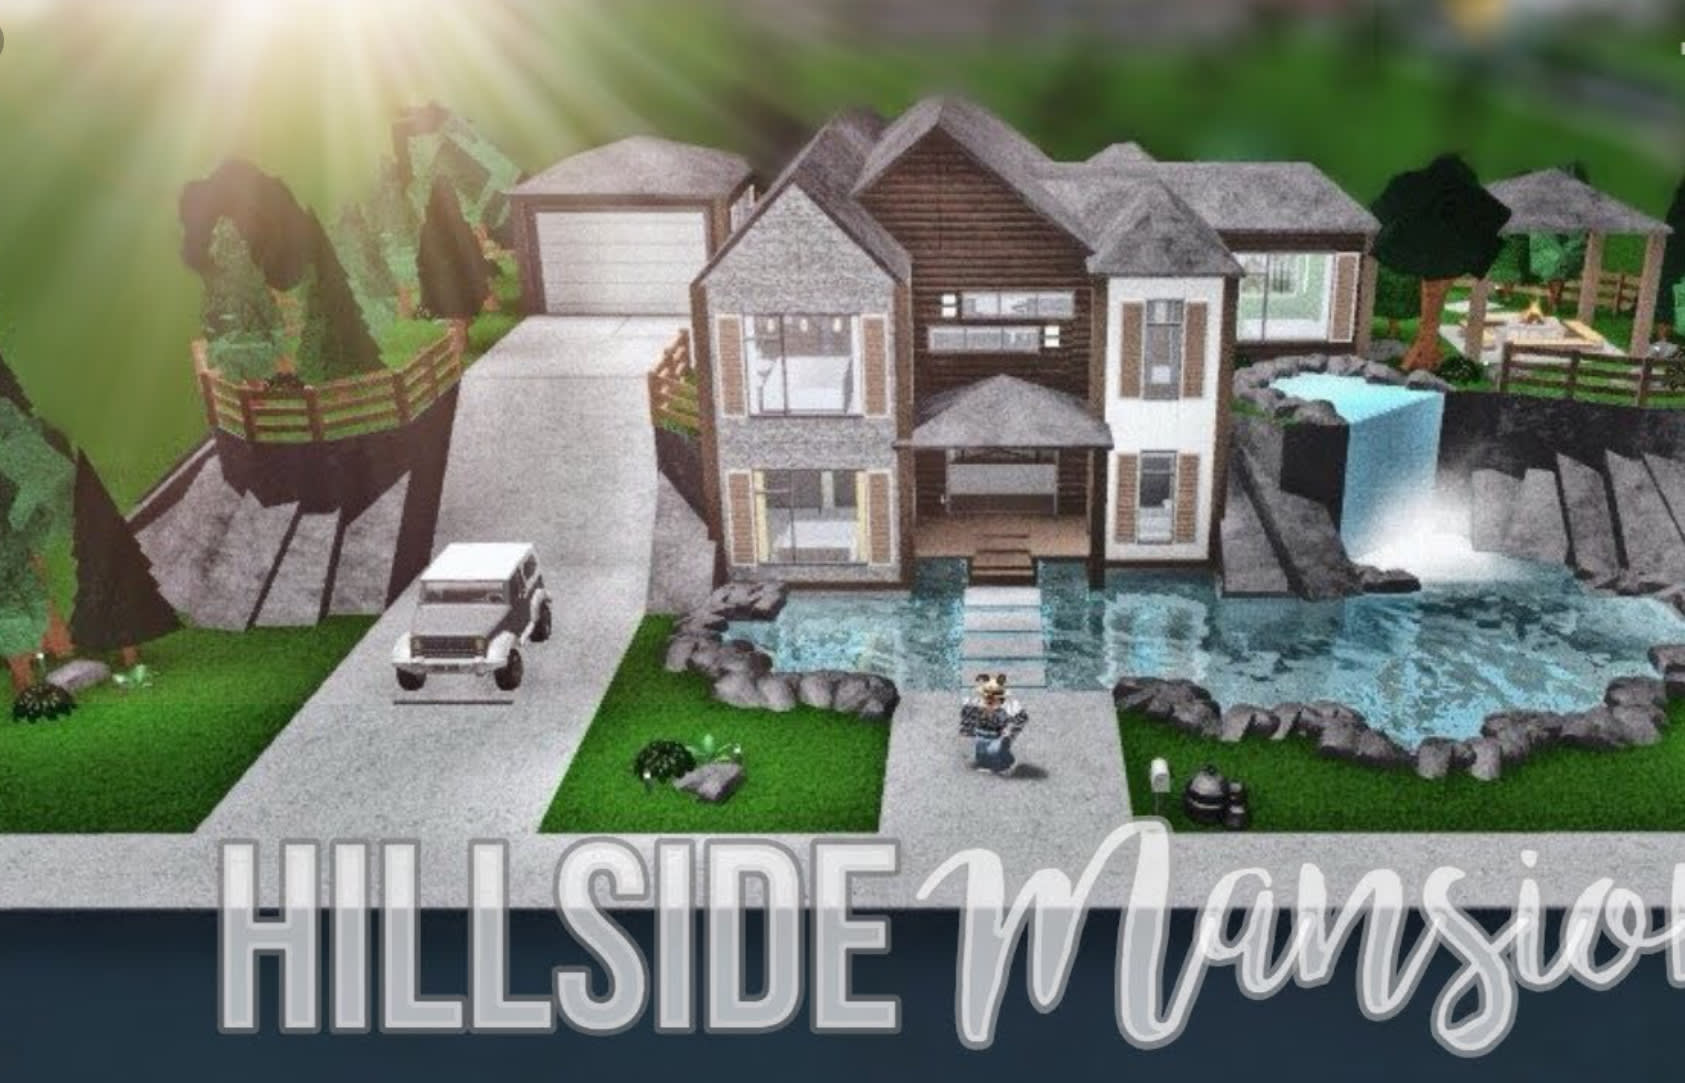 Build You A Hillside House Of A Budget Of 188k By Xrobloxbuildzx